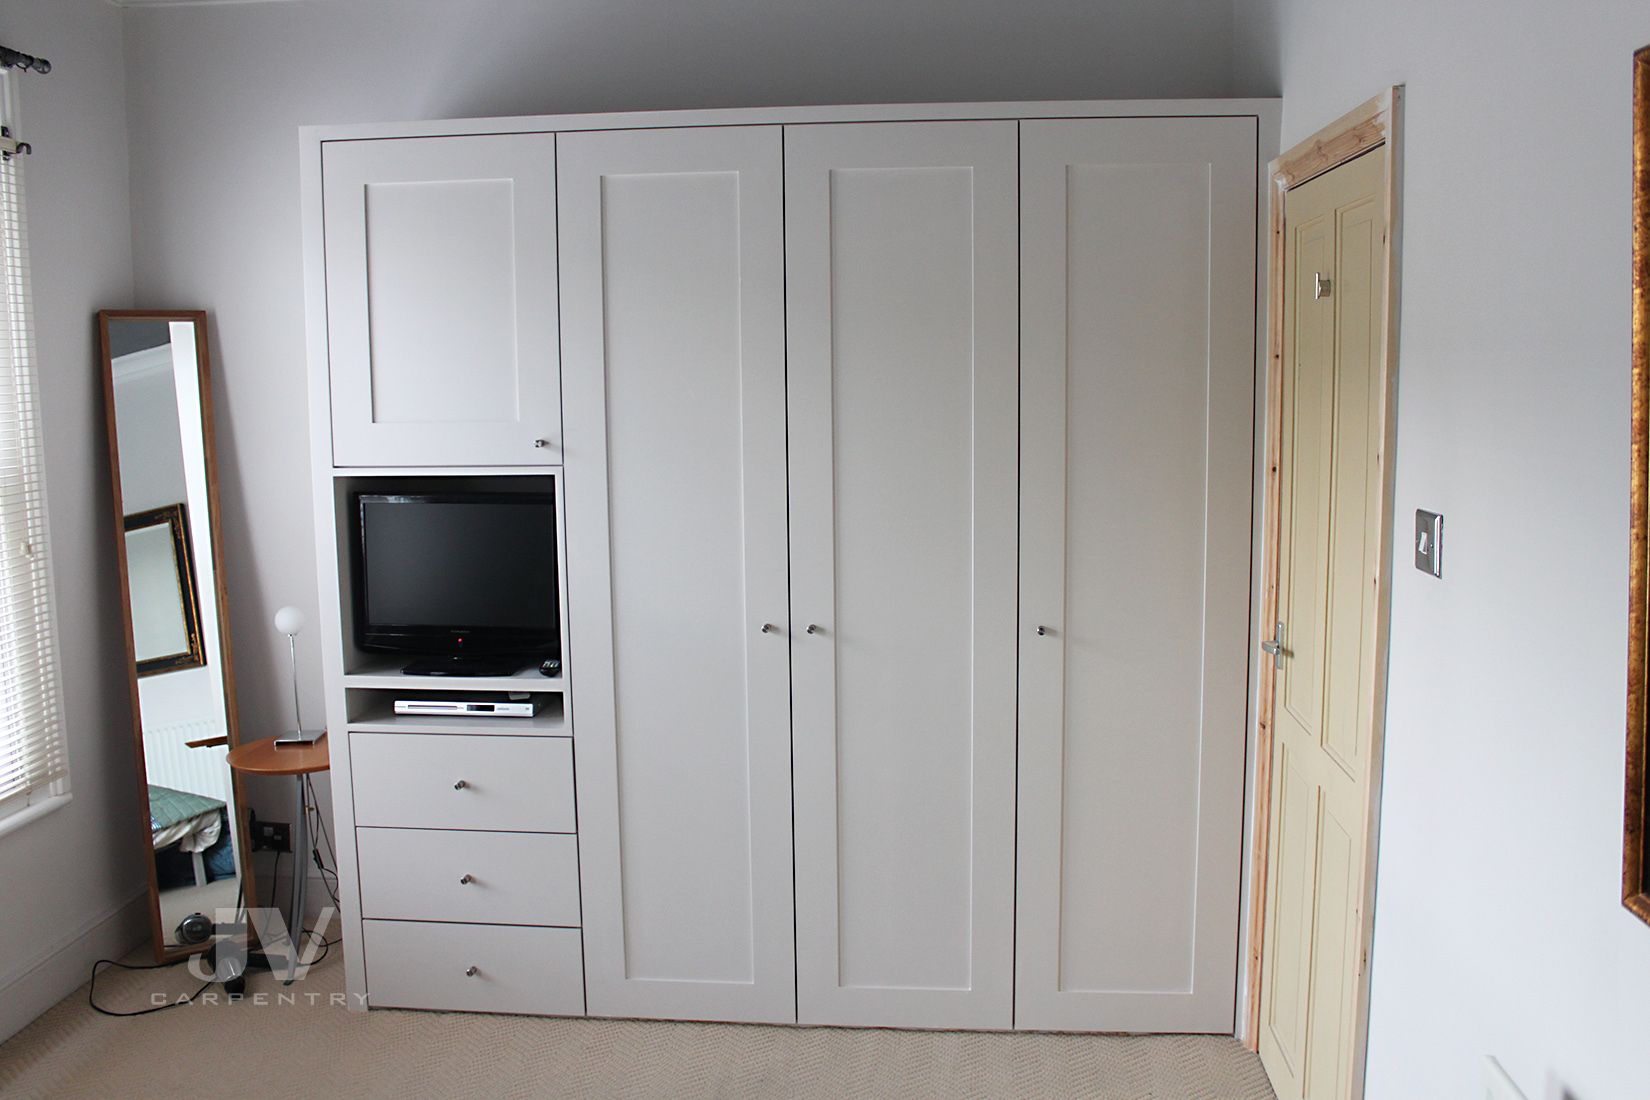 14 Fitted Wardrobe Ideas For A Small Bedroom | Jv Carpentry With Small Wardrobes (View 11 of 14)